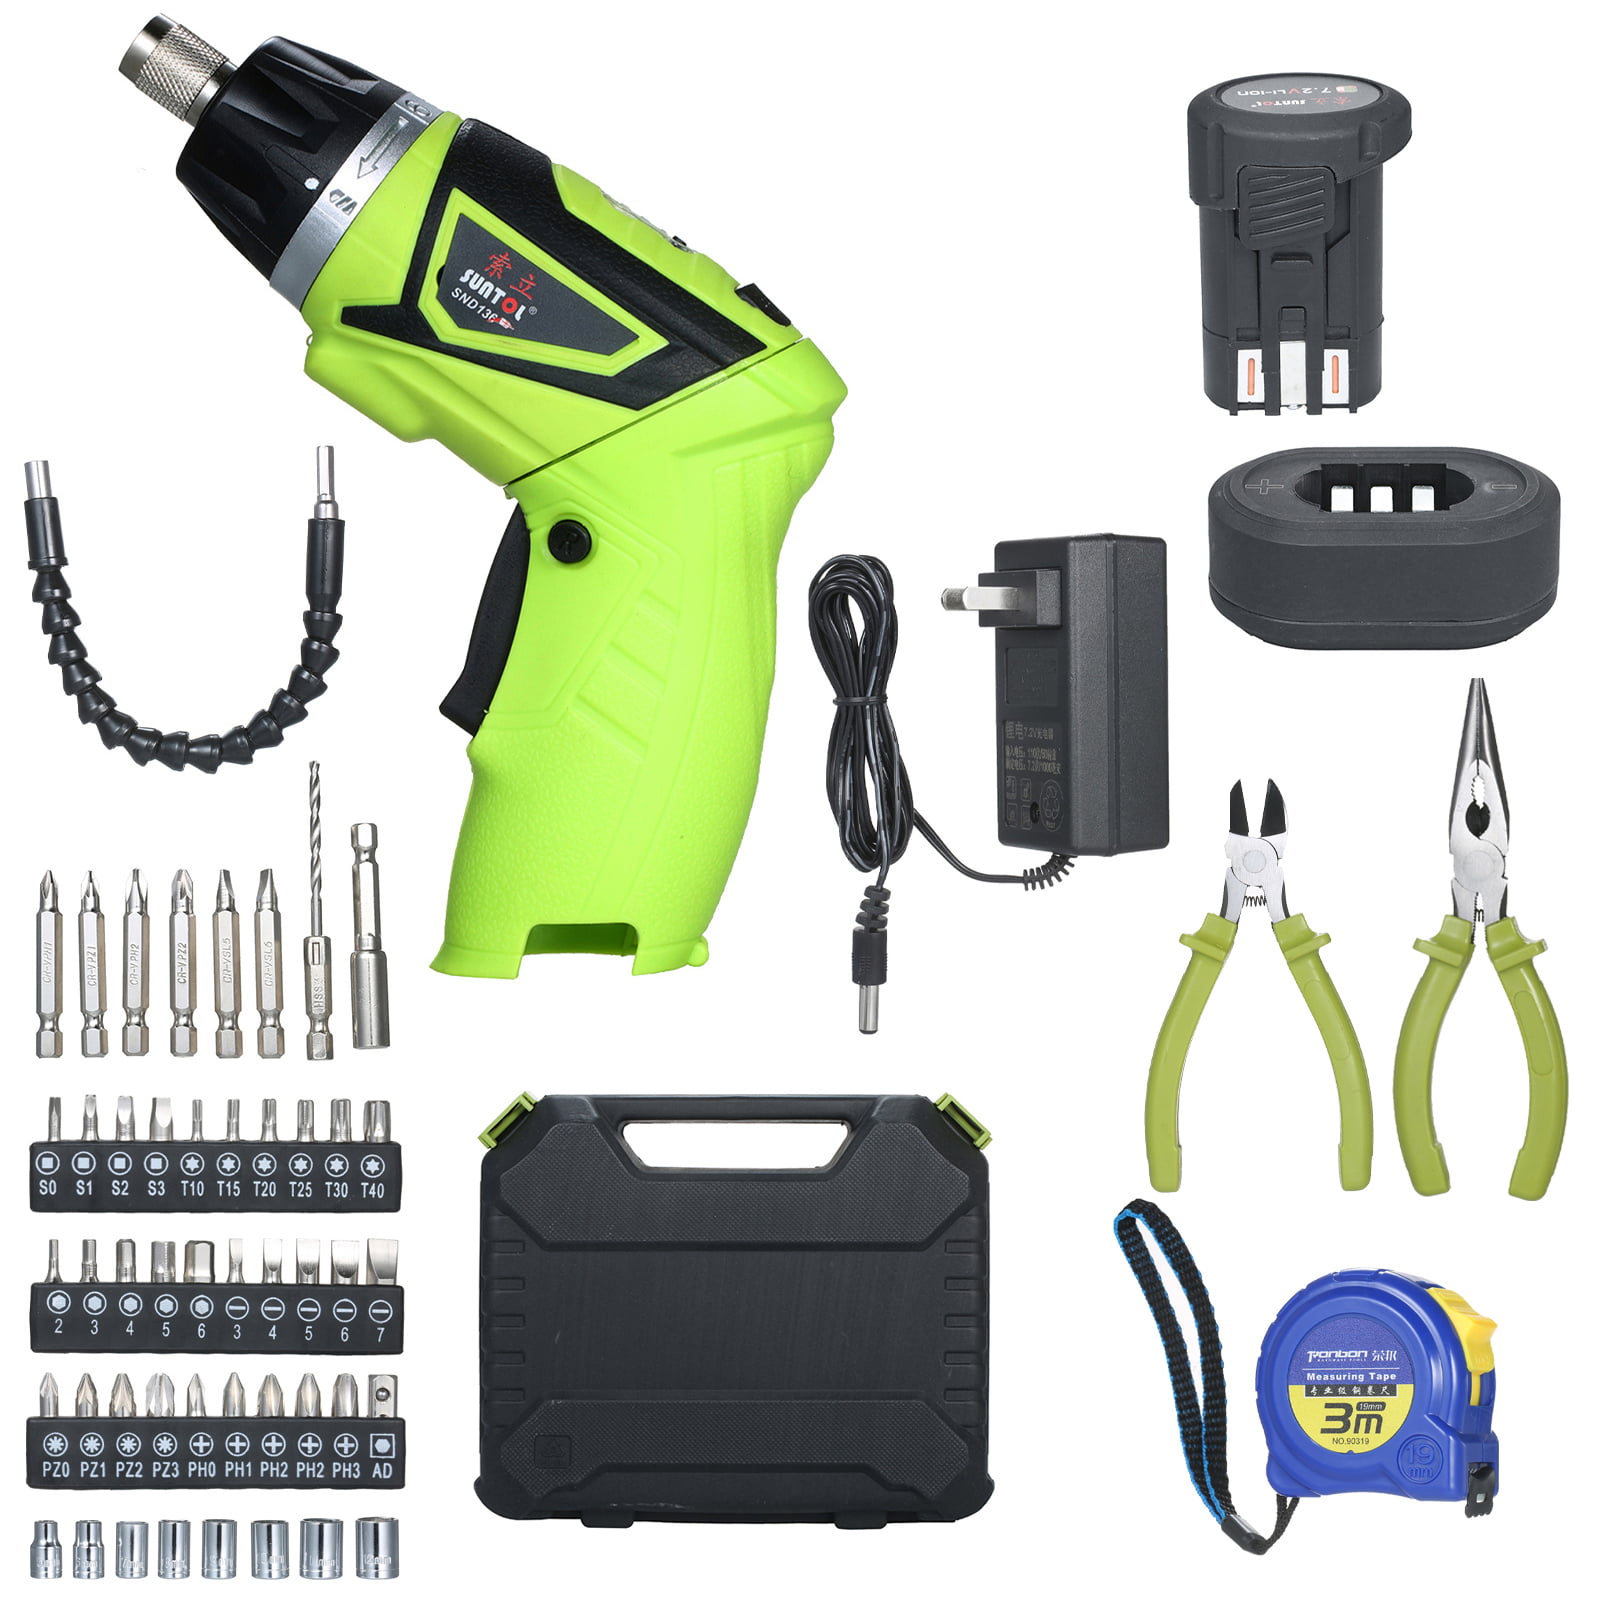 LANNERET 3.6 Volt 1500mAh Li-ion Rechargeable Cordless Electric Screwdriver with 2 Adjustable Position Handle,8+1 Torque Gears,Set In-built with Flashlight,Front LED,Green 